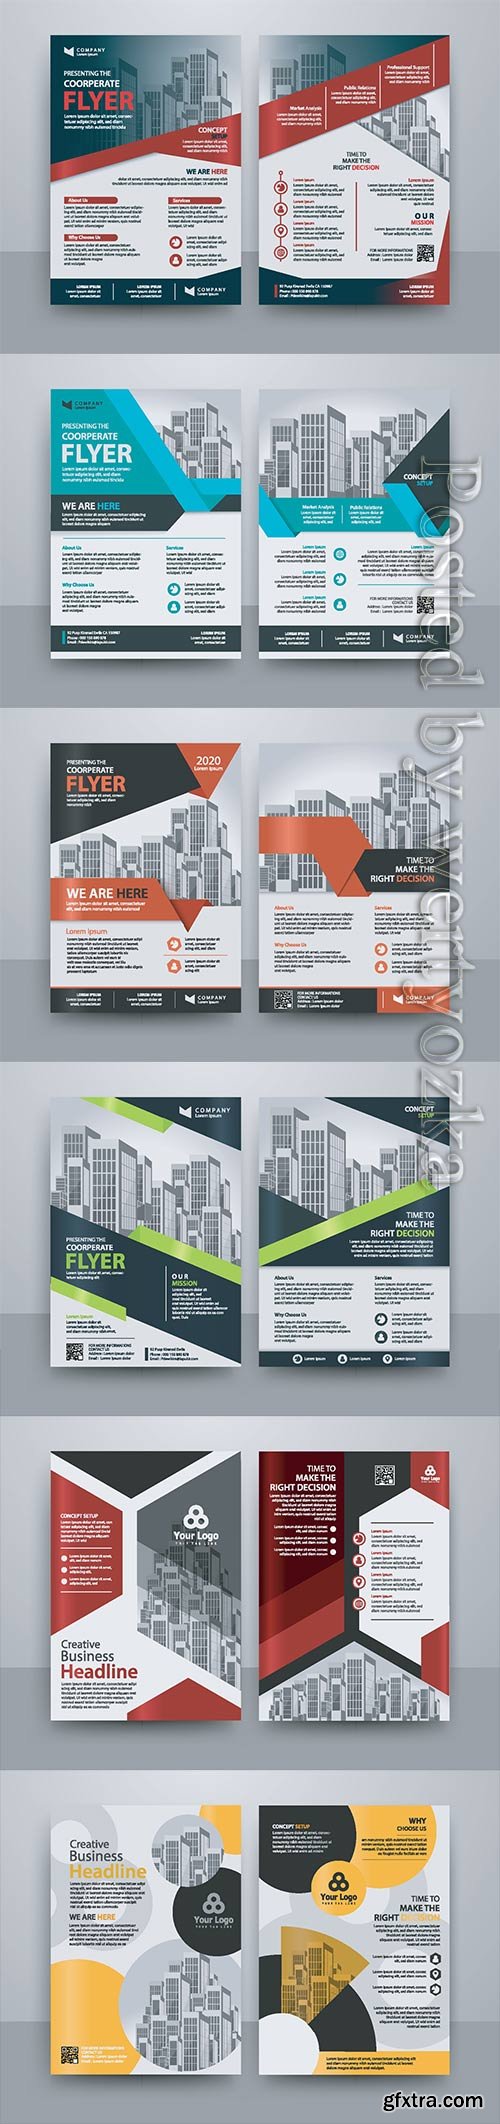 Business vector template for brochure, annual report, magazine # 21